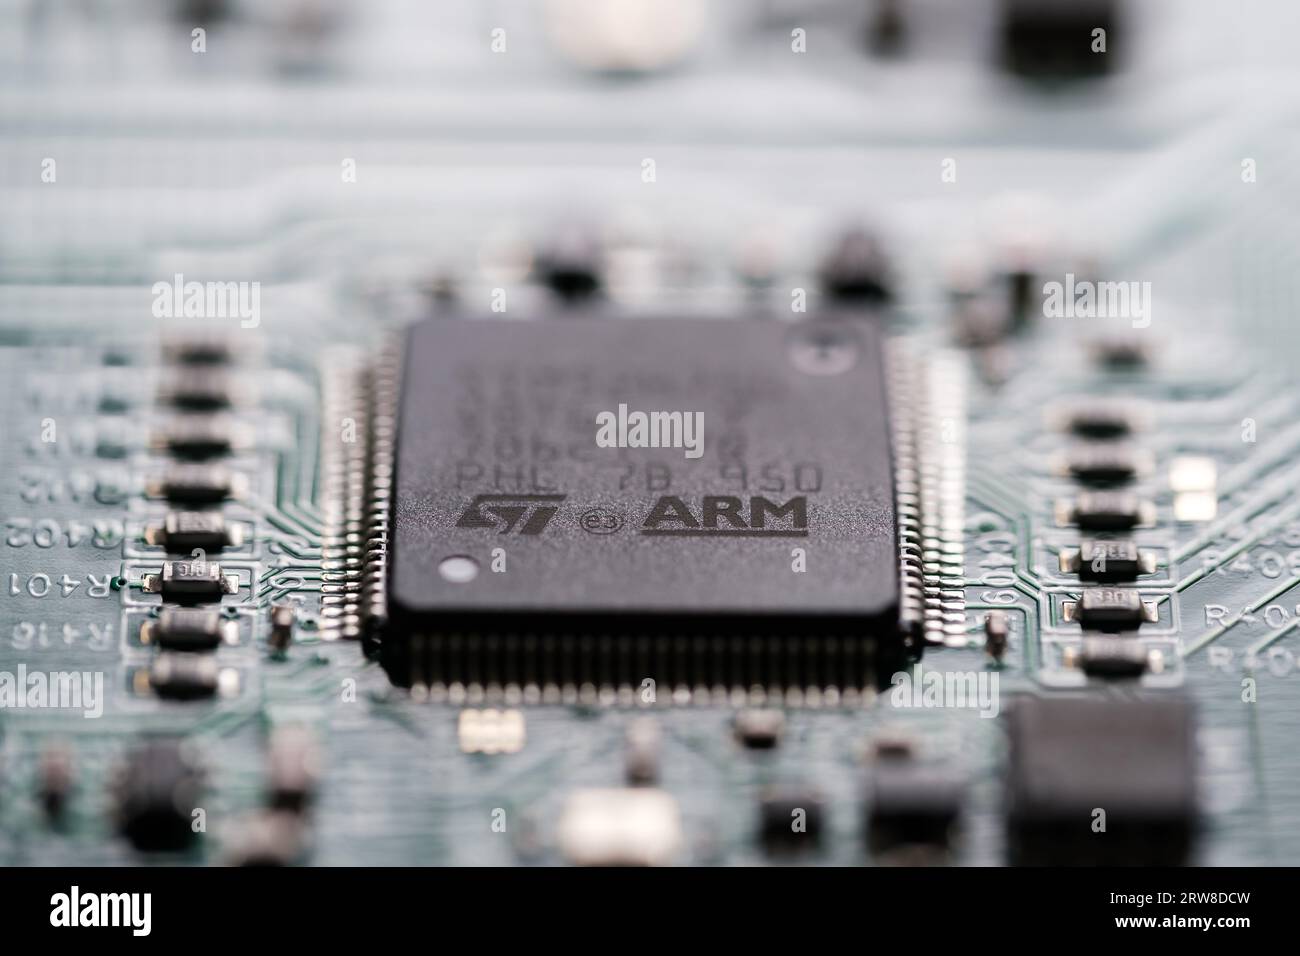 ARM company logo seen on microchip wich is soldered on a Printed Circuit Board (PCB).  Selective focus. London, United Kingdom, September 17, 2023 Stock Photo